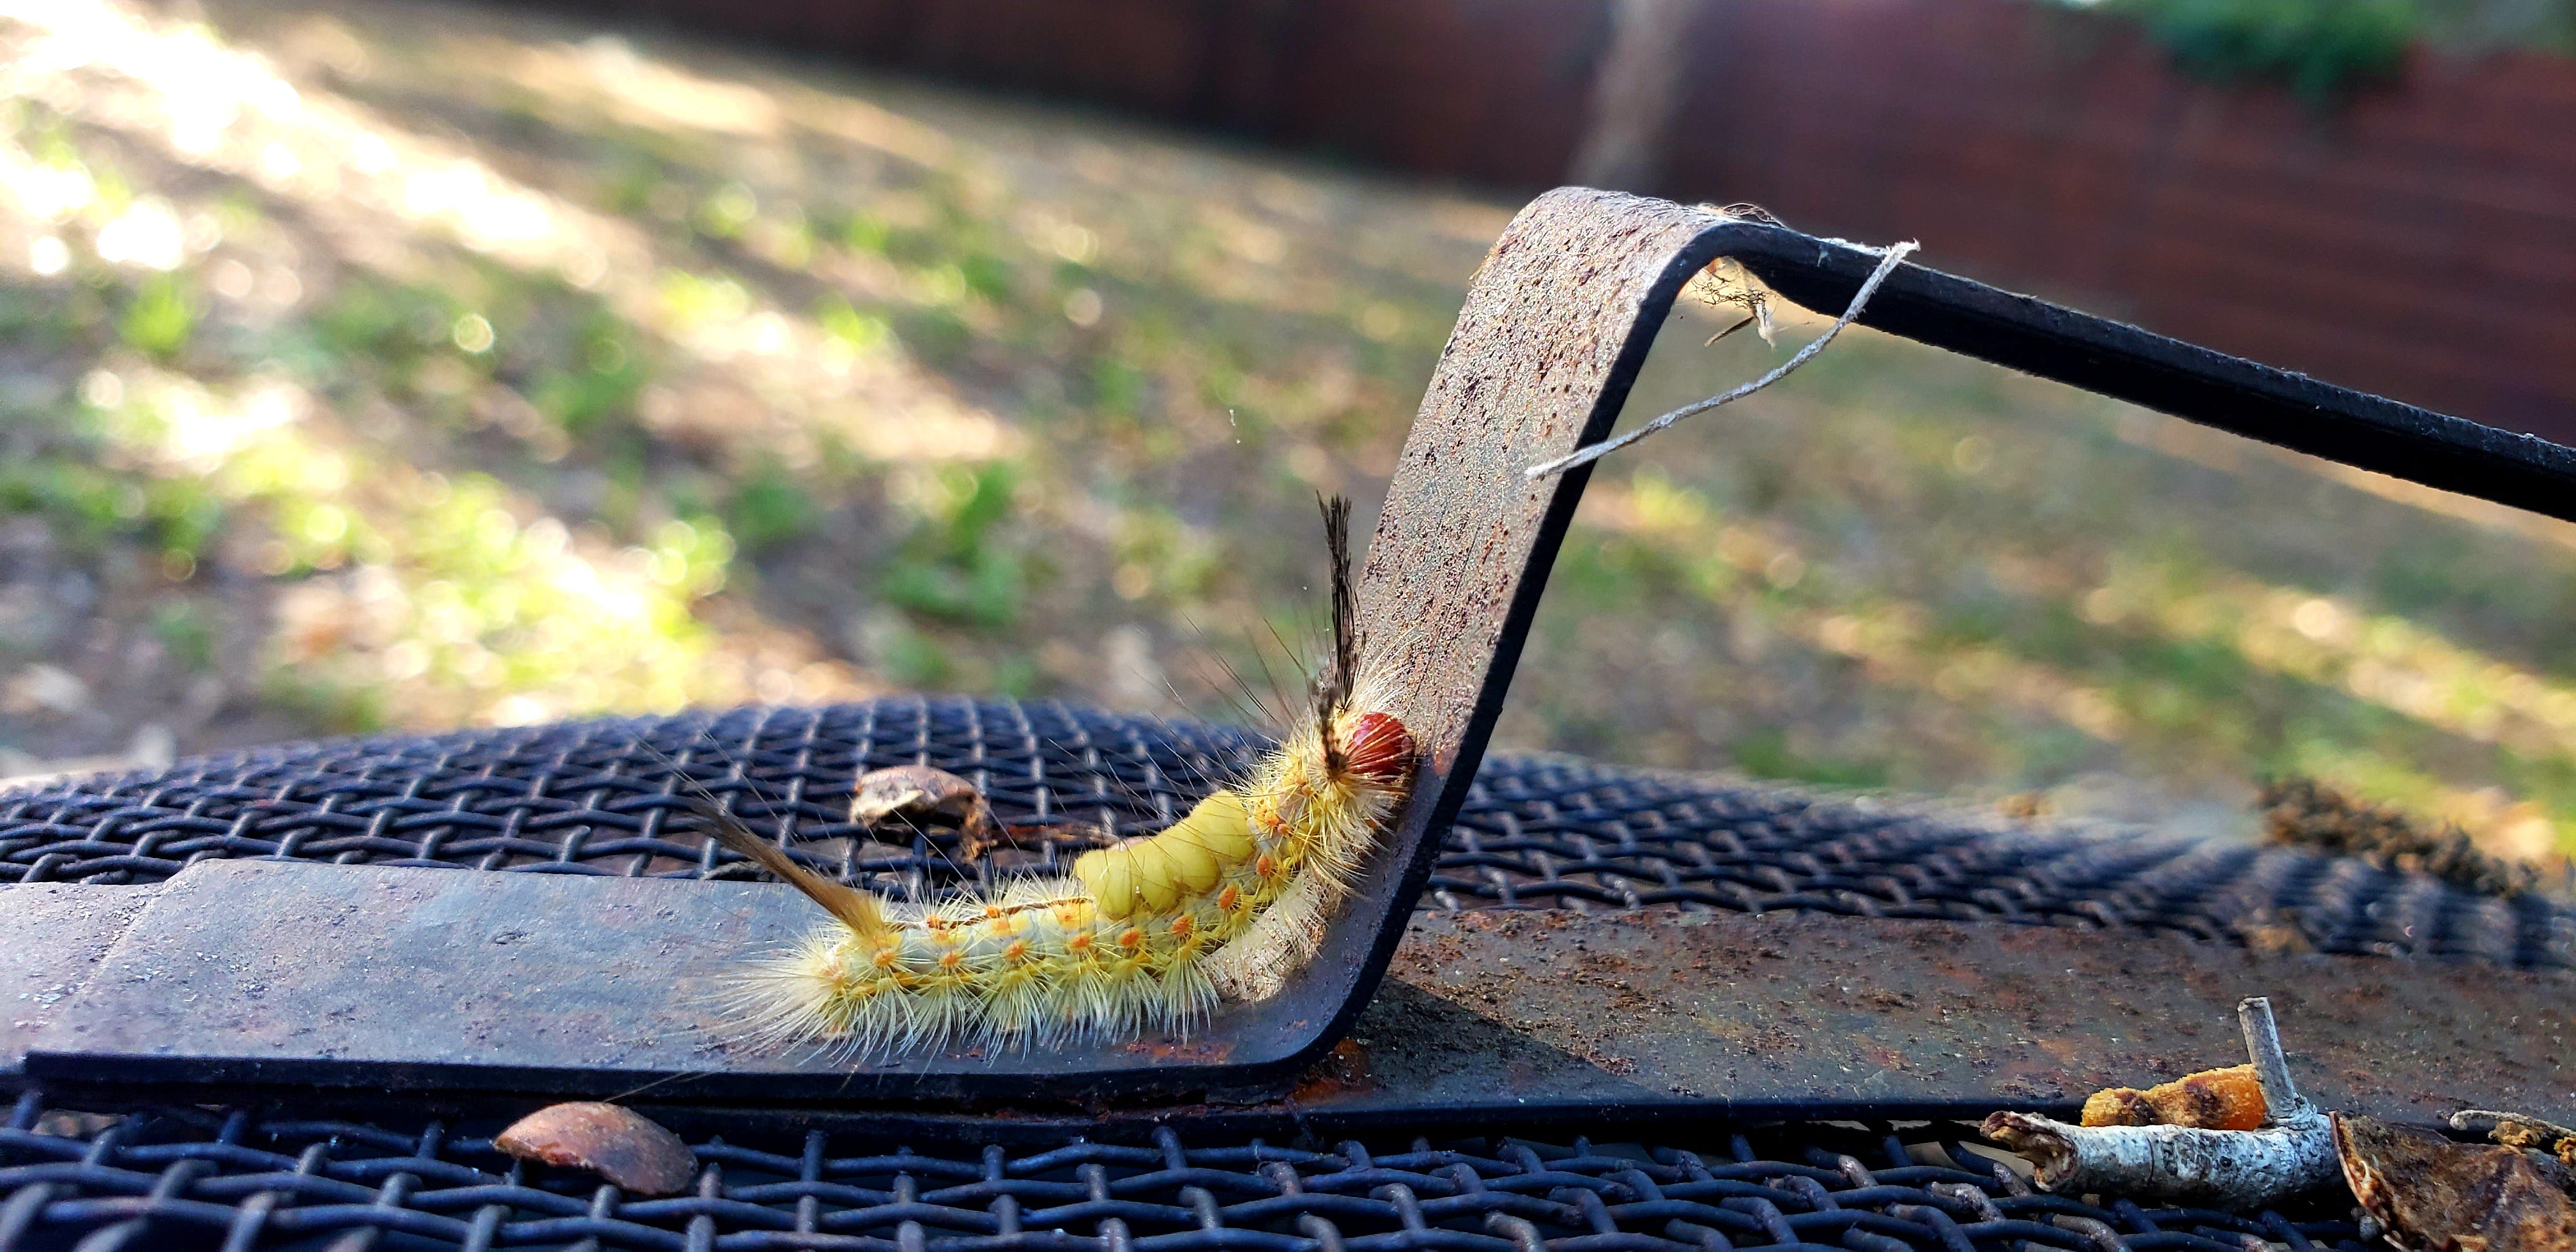 Central Florida Is Ground Zero Tussock Moth Caterpillars In April